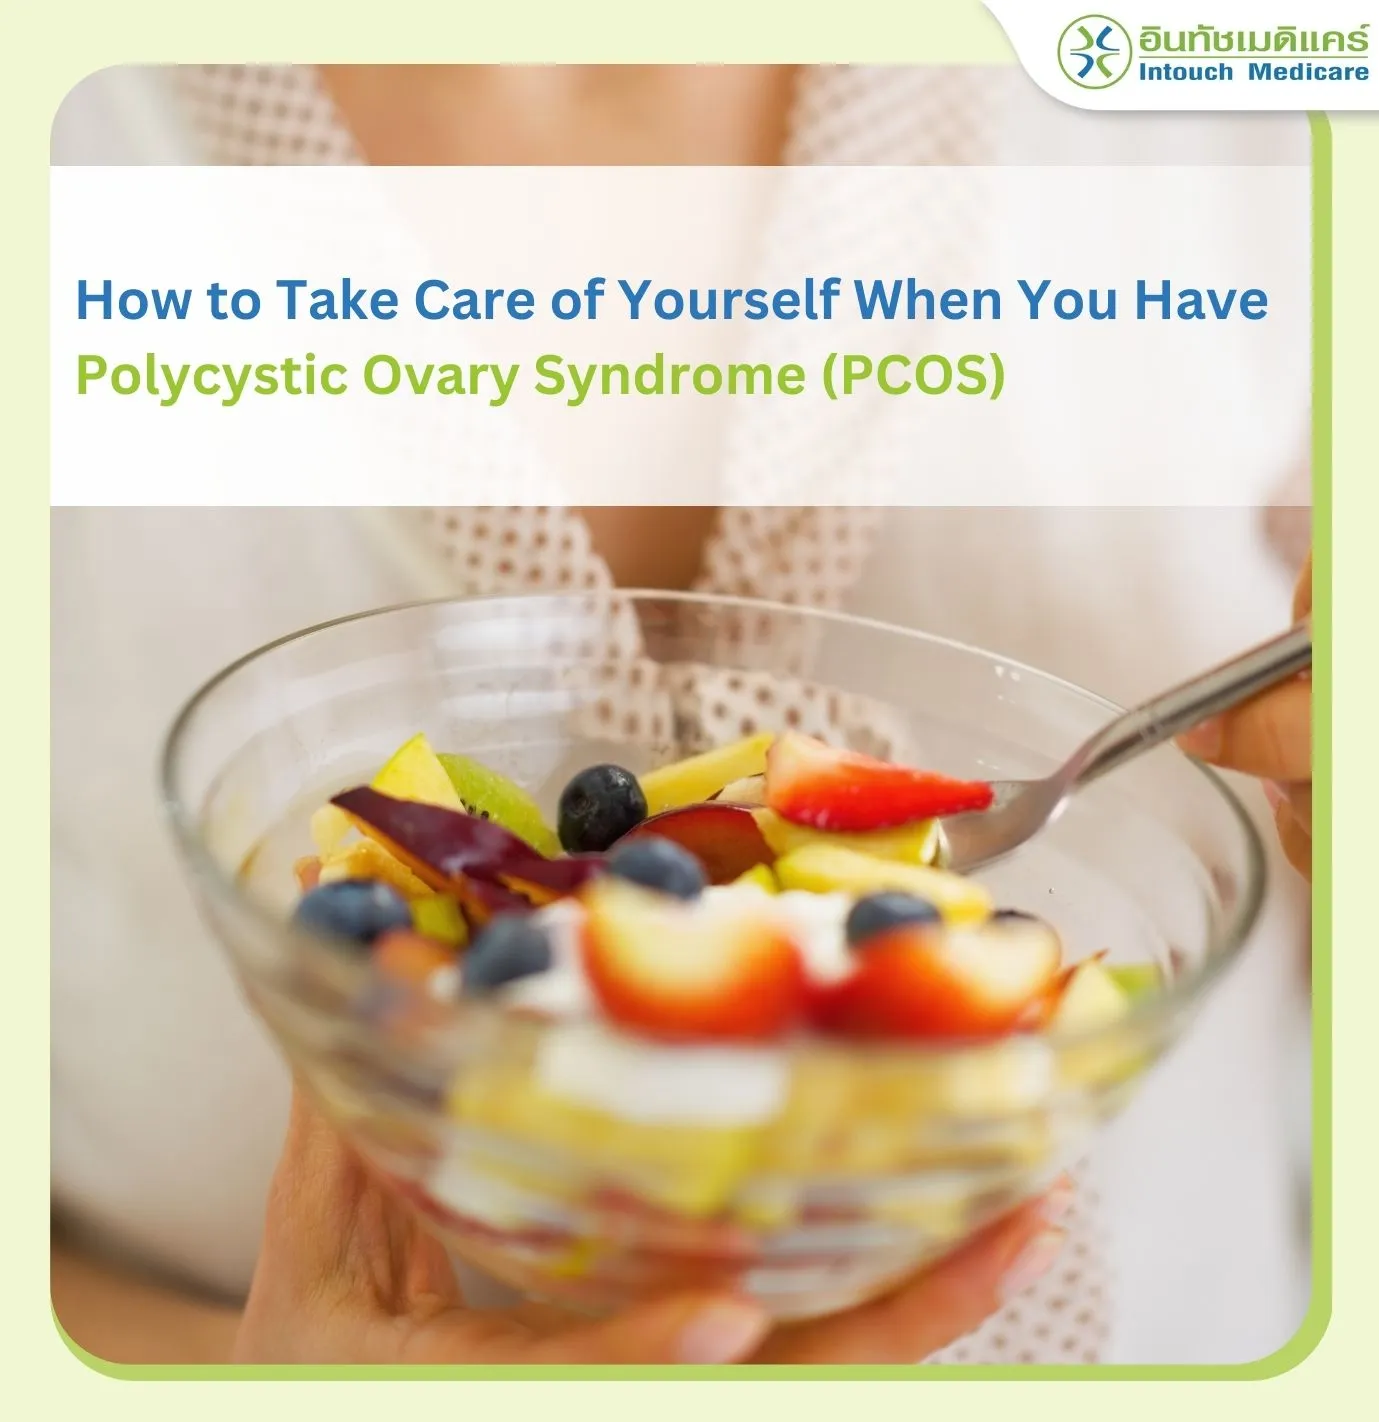 How to Take Care of Yourself